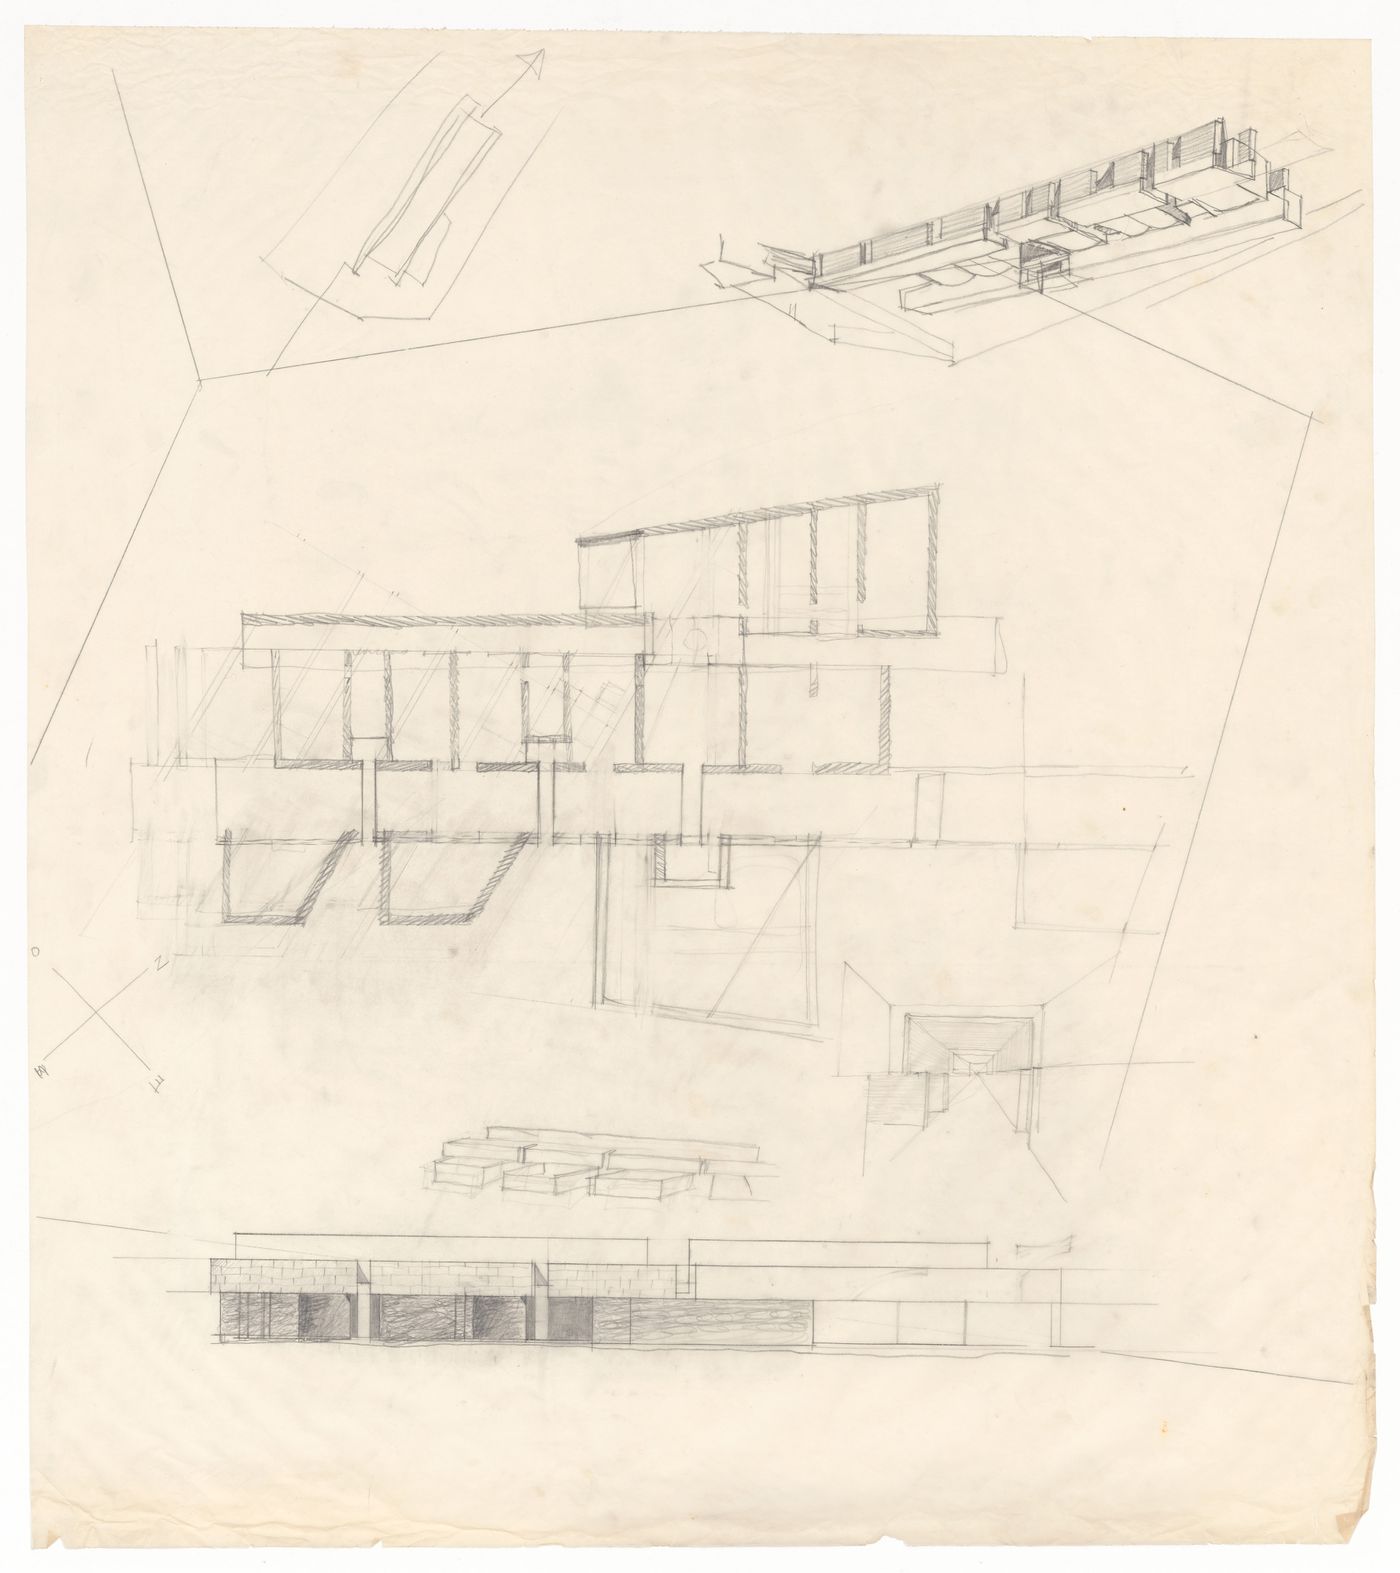 Floor plan, detail, and elevation sketches for Case Di Palma, Stintino, Italy